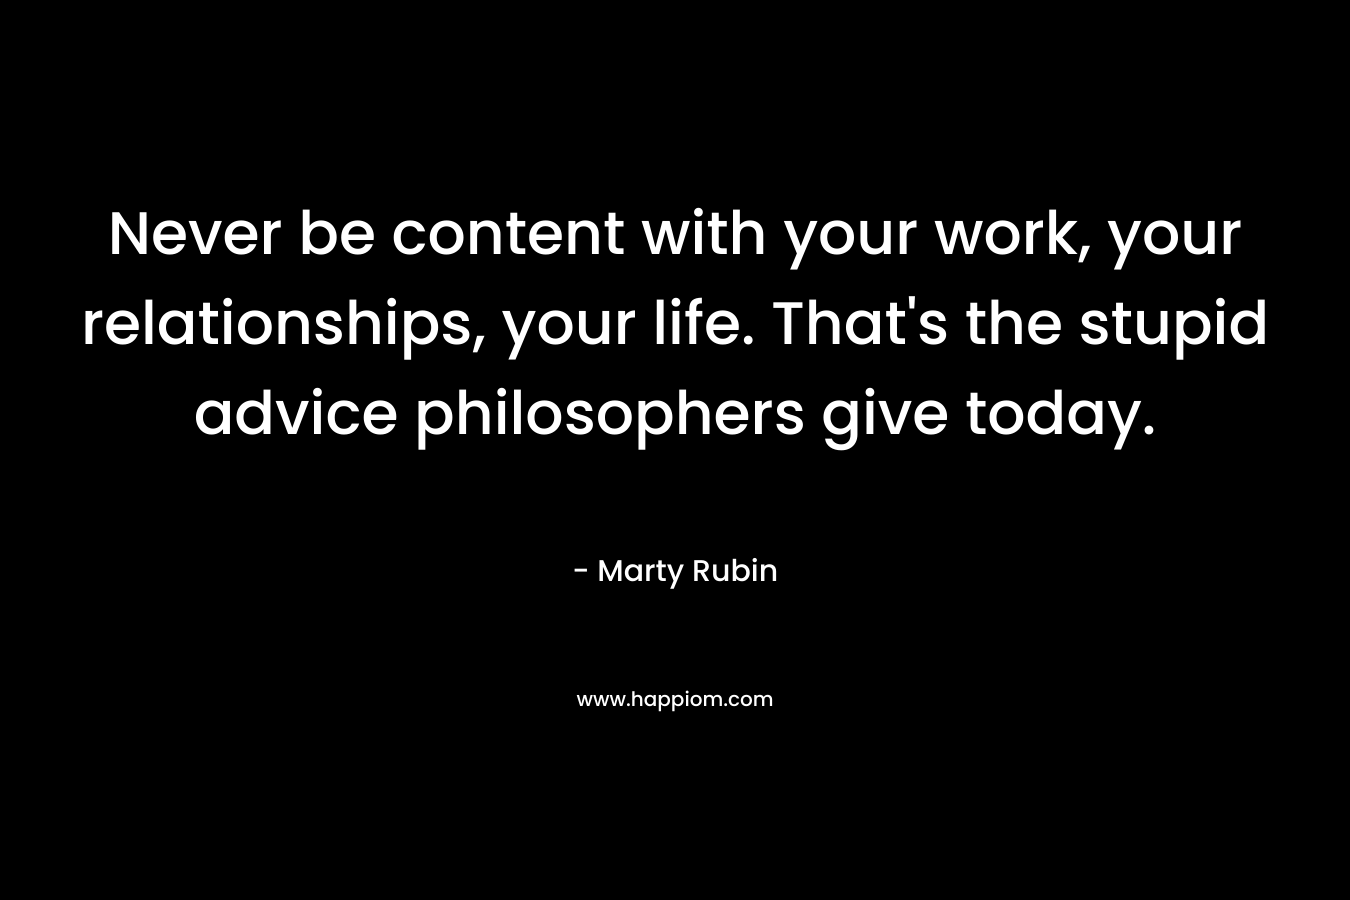 Never be content with your work, your relationships, your life. That's the stupid advice philosophers give today.